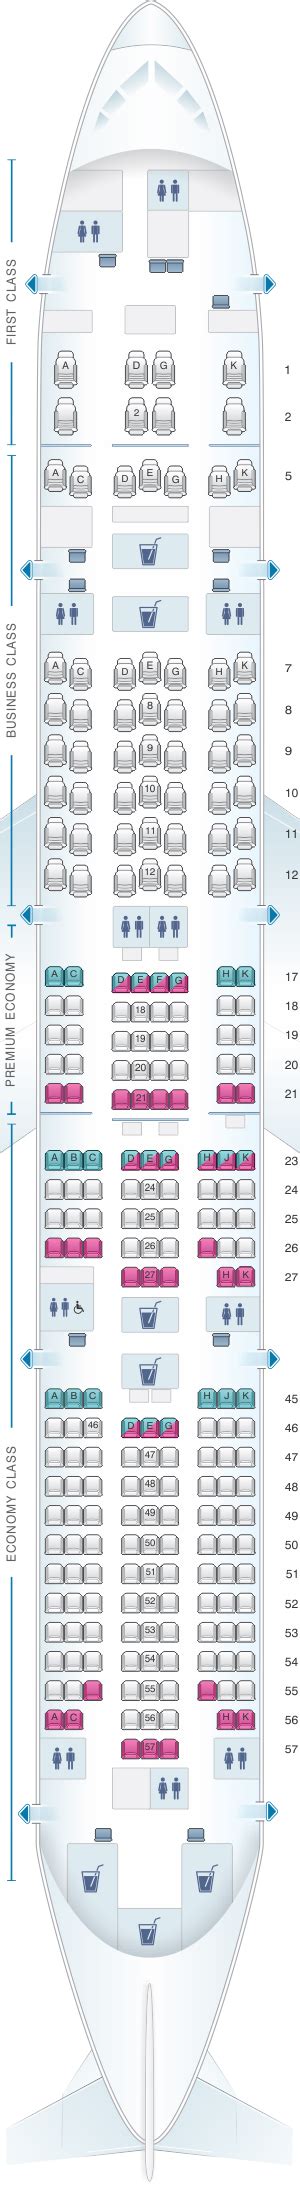 jal boeing 777 seating chart